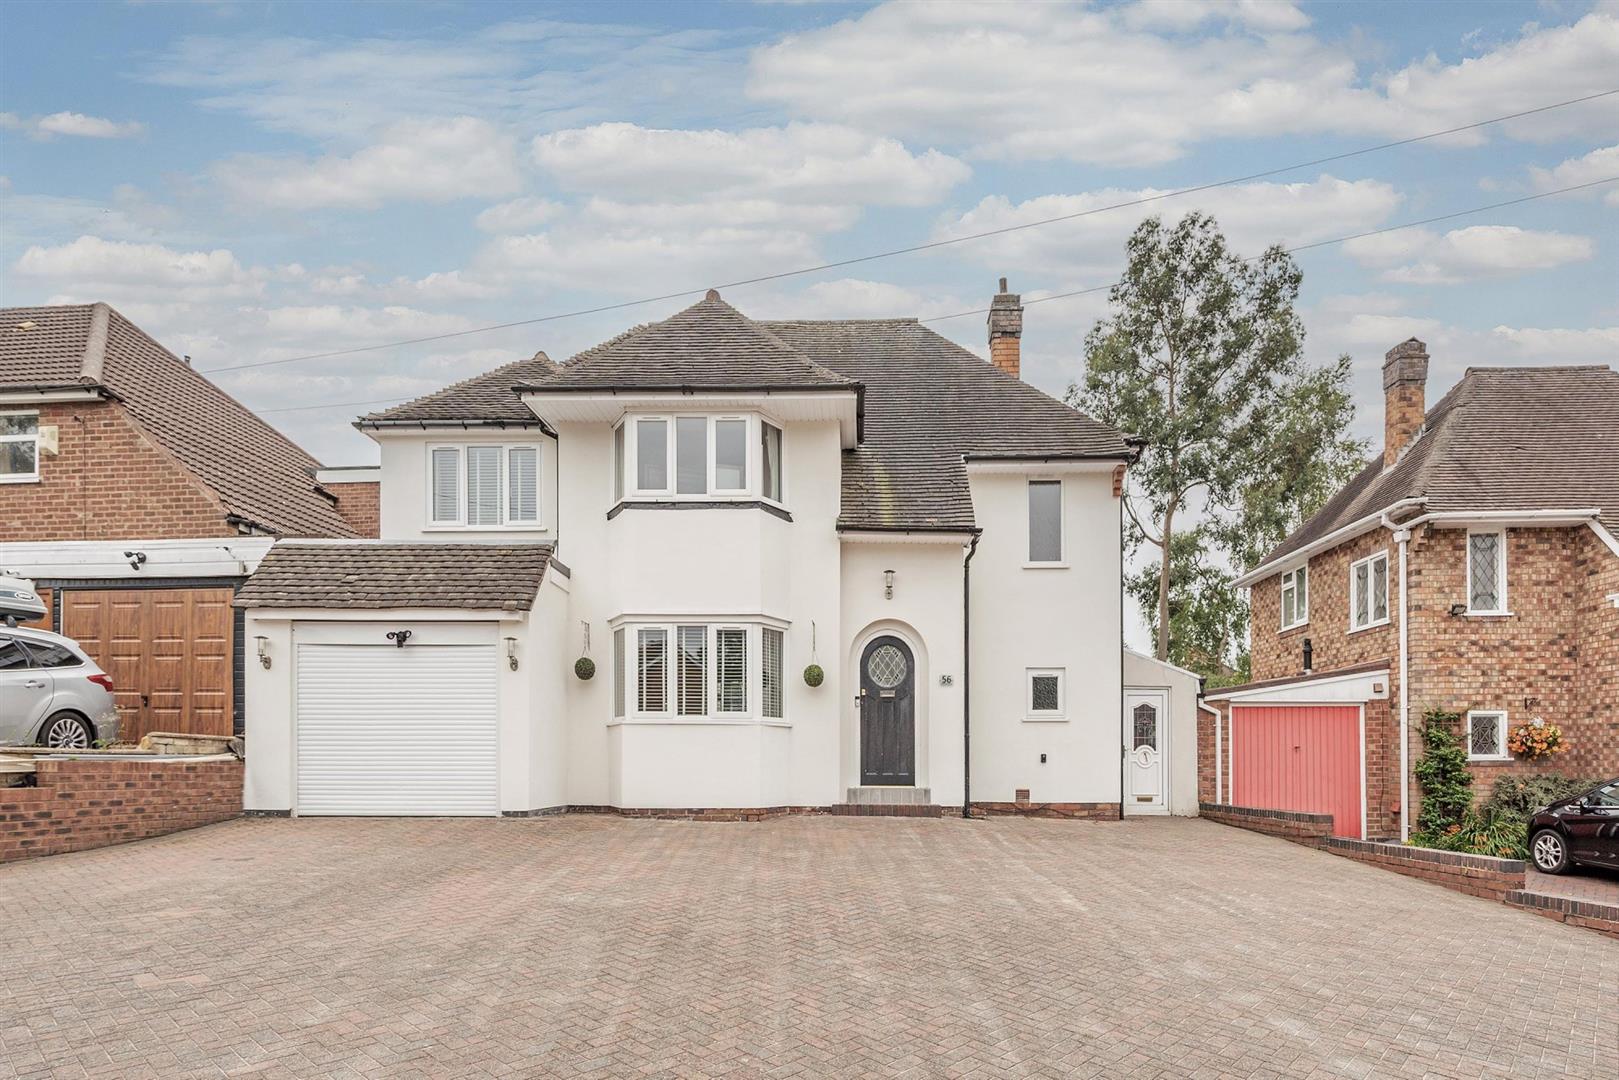 5 bed detached house for sale in Ulverley Green Road, Solihull - Property Image 1